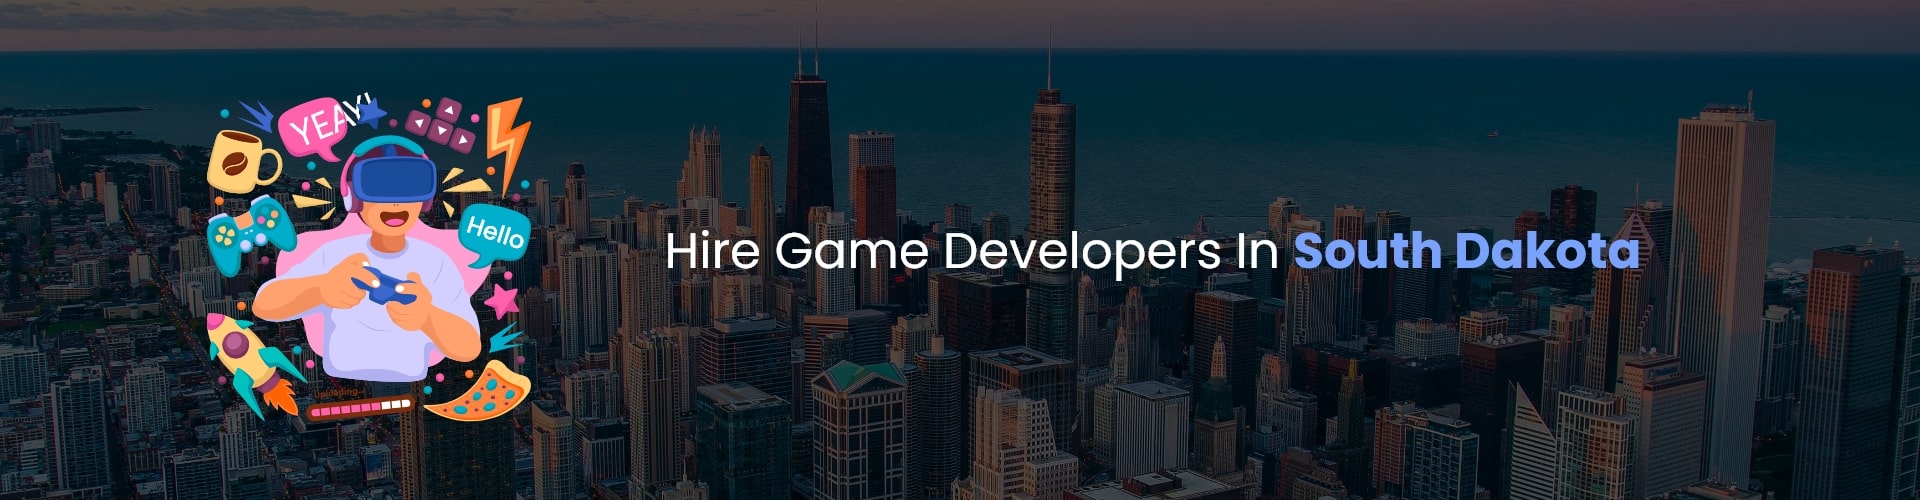 hire game developers in south dakota